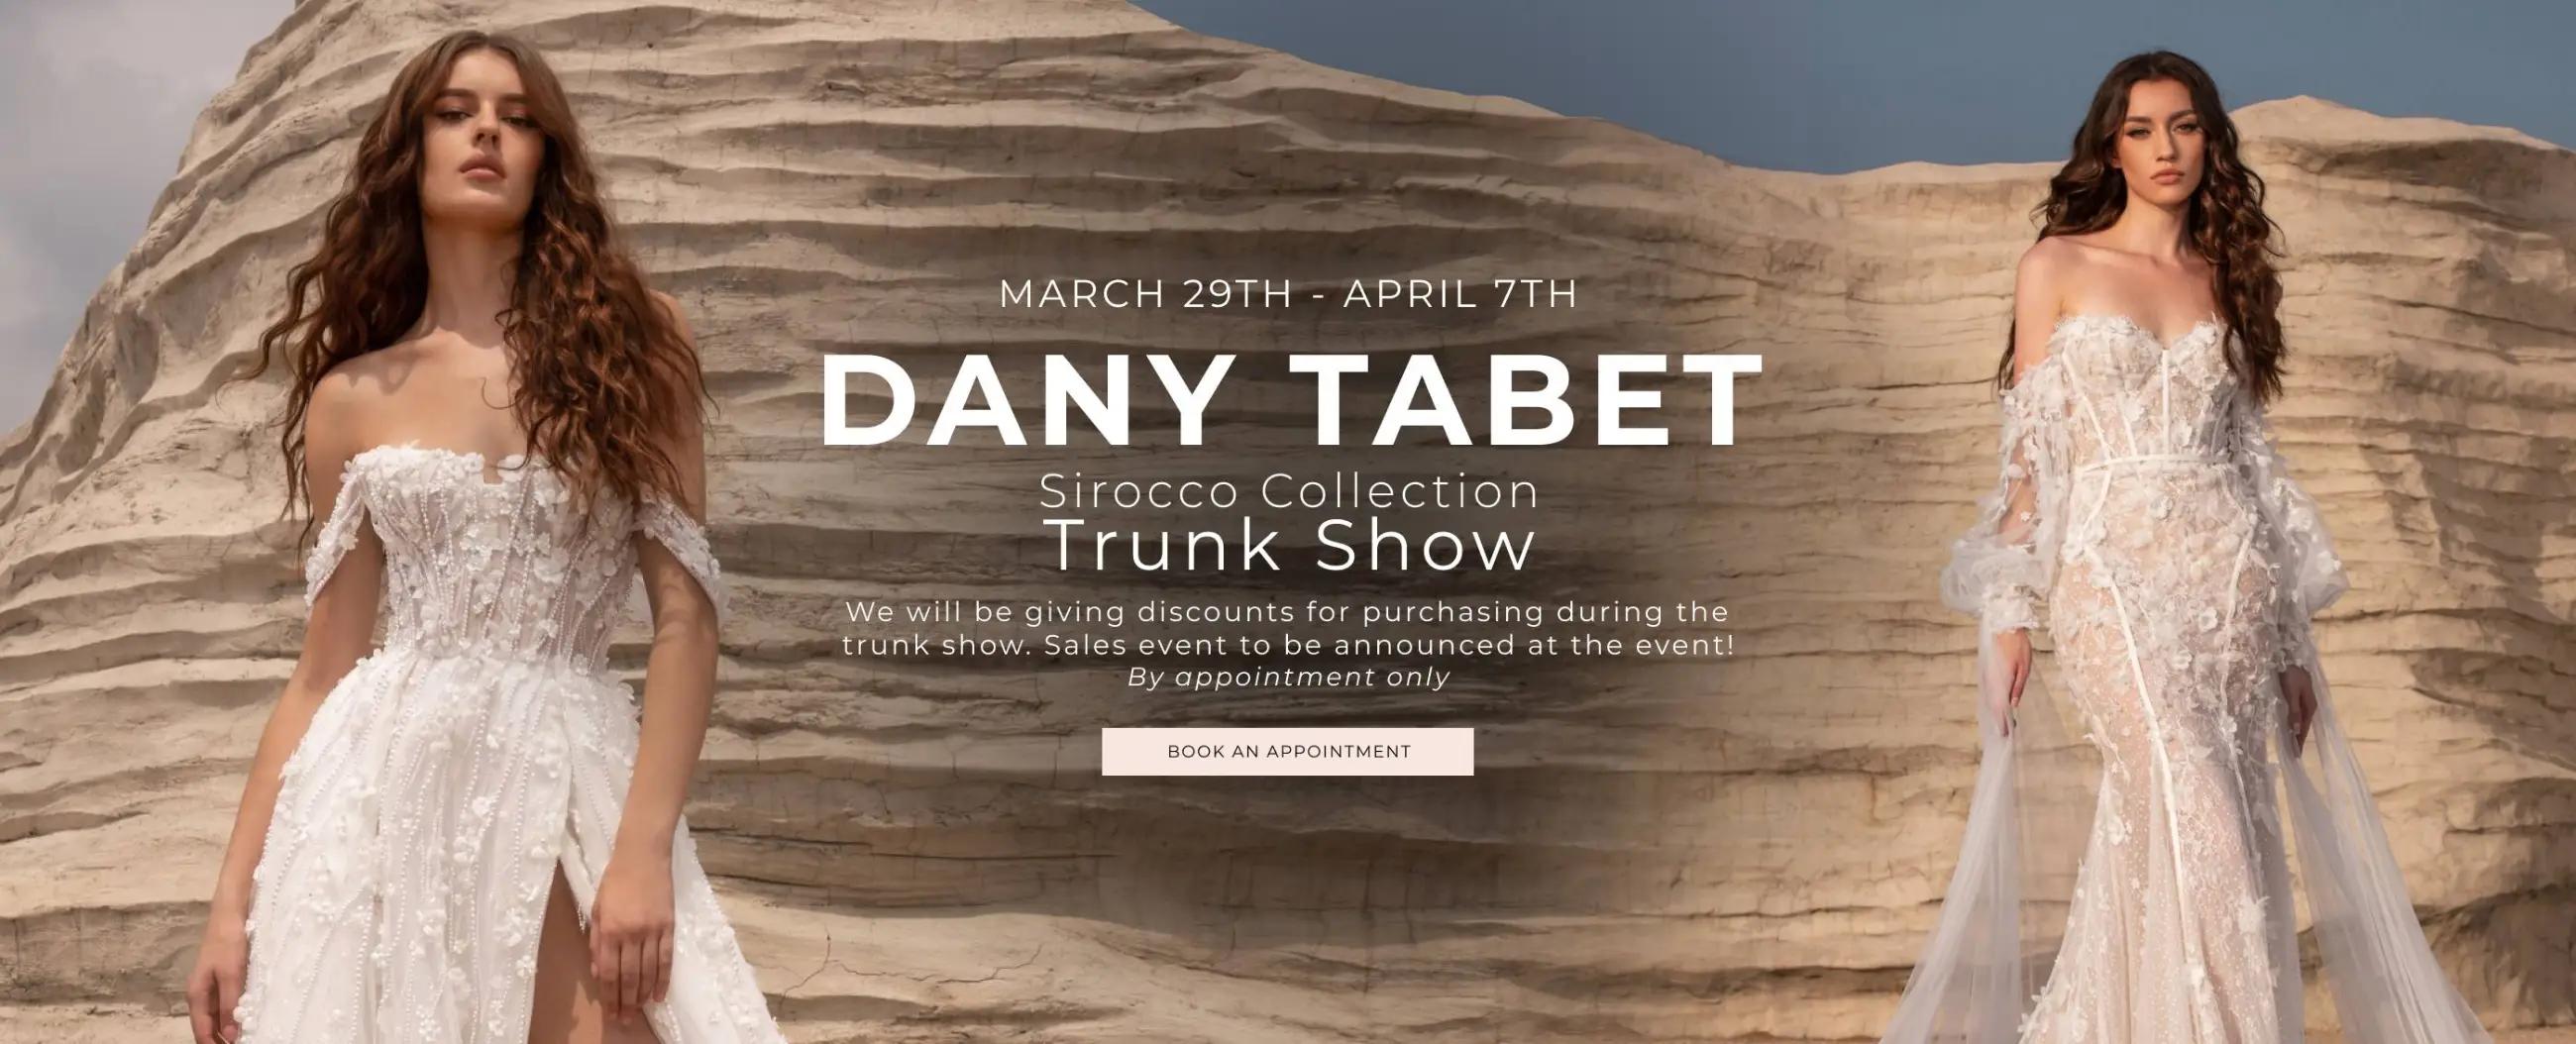 Dany Tabet Sirocco Collection Trunk Show Banner